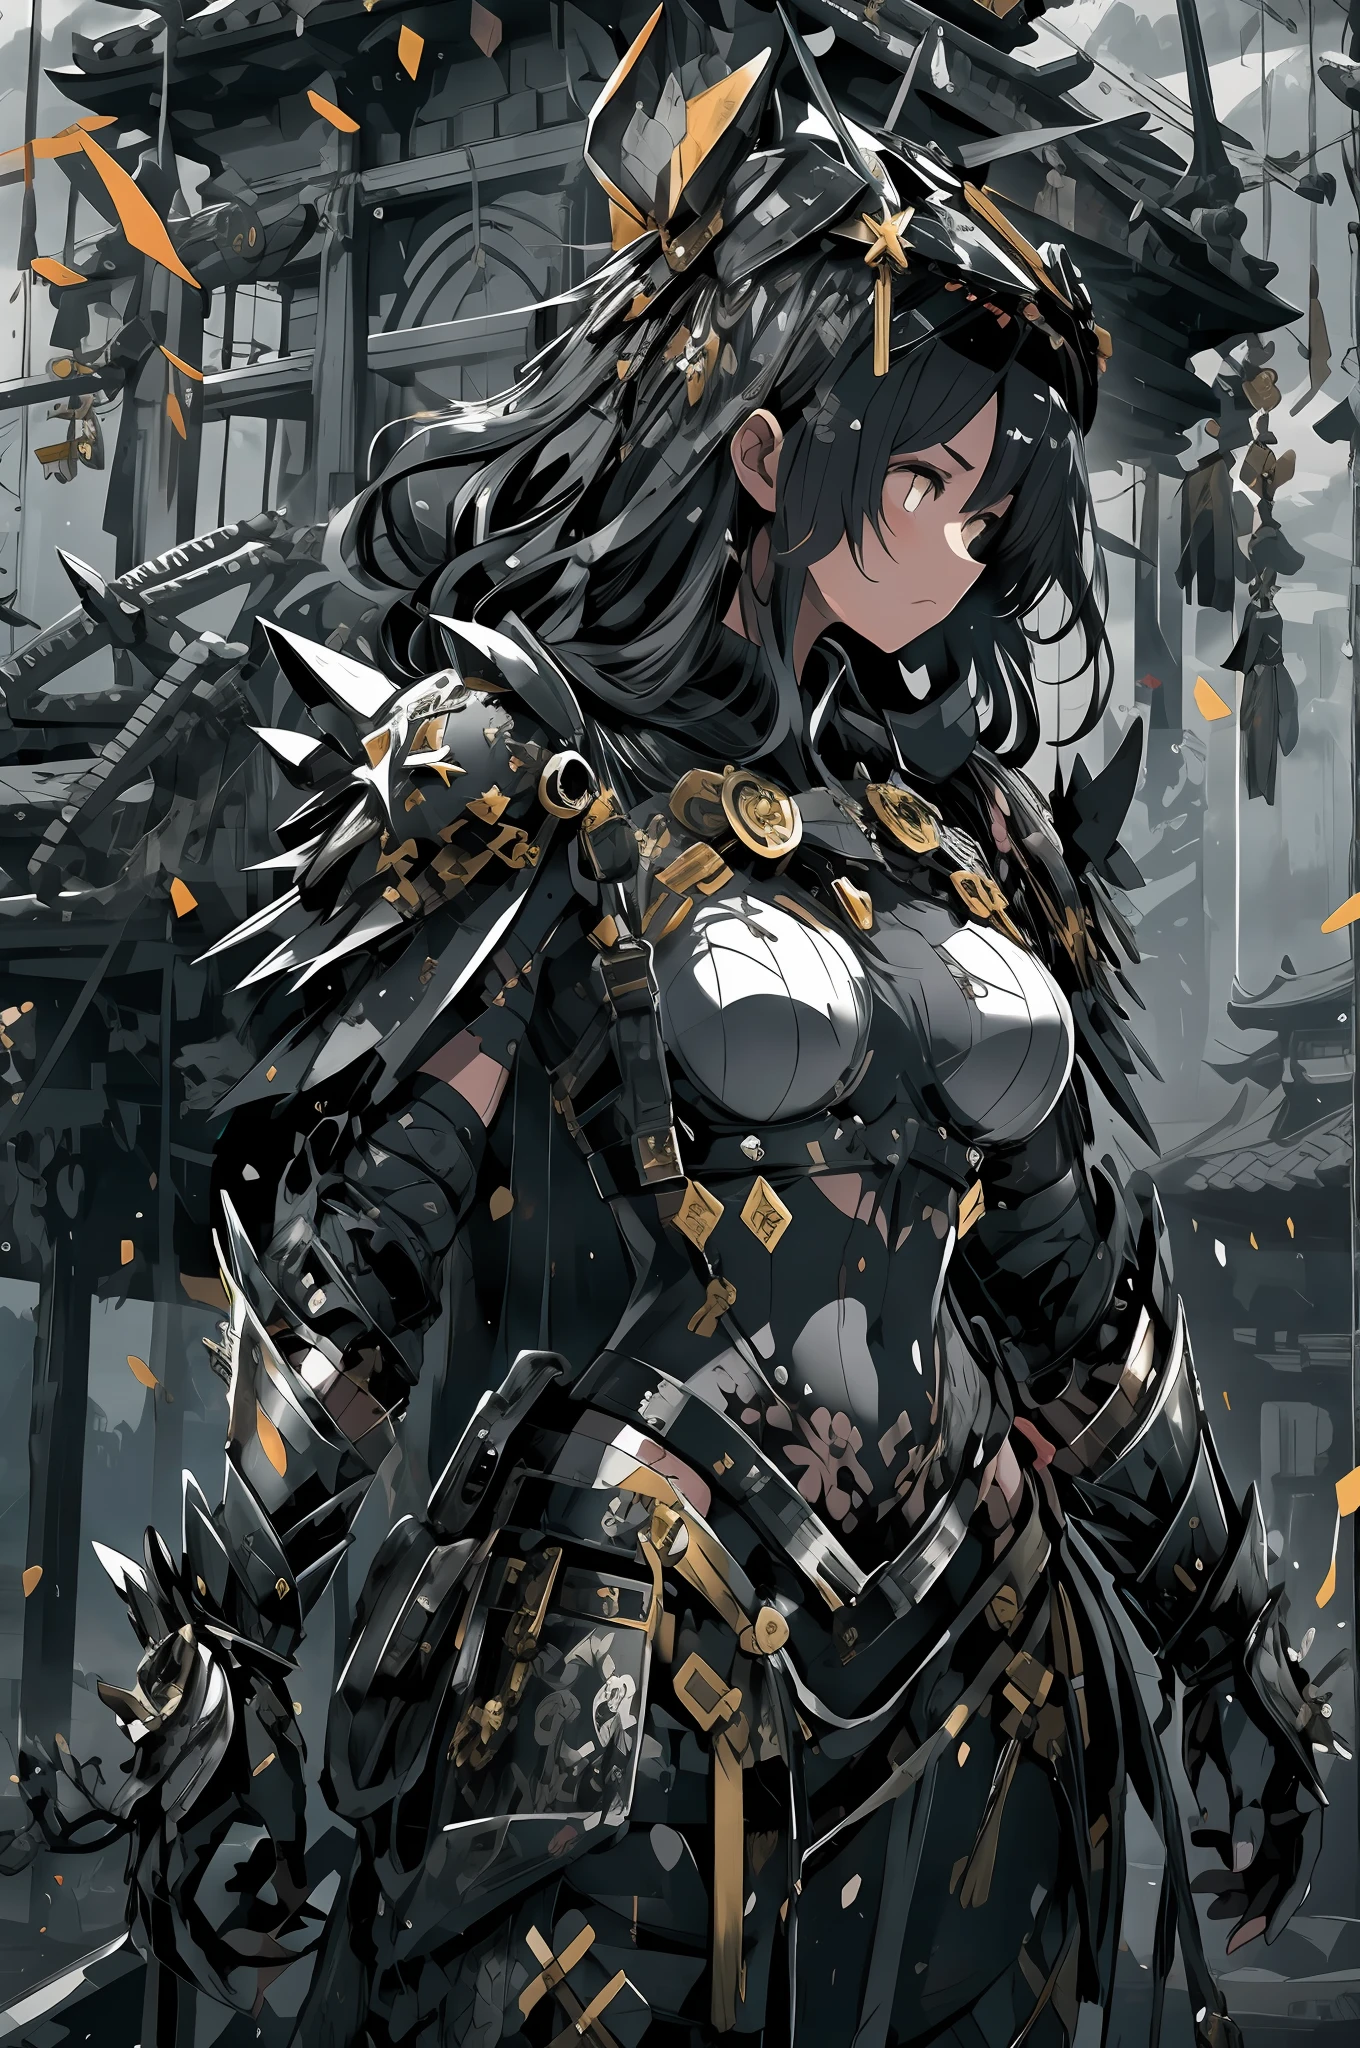 ​masterpiece, top-quality, hightquality, abyssal, awardwinning photo, depth of fields, nffsw, ighly detailed, trending on artstationh, Trending in CGSighbour, Convoluted, high detailing,This illustration is、It is a fantasy scene that emphasizes weight and strength.。Female warrior in black armor、Stand with a very large sword in each hand。Her armor is、Covered with thick and heavy steel plates、You can feel its weight and dignity.。The design of the armor is、Attention to detail、Carved patterns and reliefs exisymbolizes her pride and determination as a warrior。

Her expression was、Firm determination.、Eyes have a mysterious glow, As if staring into the distance。Her gaze is、It shows its inner strength and determination.、You can feel the fighting spirit hidden in her chest。

The surroundings include、Turbulent powder々Became glass、Sound and spectacle further accentuate the majestic atmosphere.。Steel armor and powder々The contrast of the glass that became、Symbolizes the trials of the female warrior's past and her indomitable will。

This illustration is、Through the figure of a female warrior with strength and solidity、It depicts a message of strength and courage to overcome adversity。